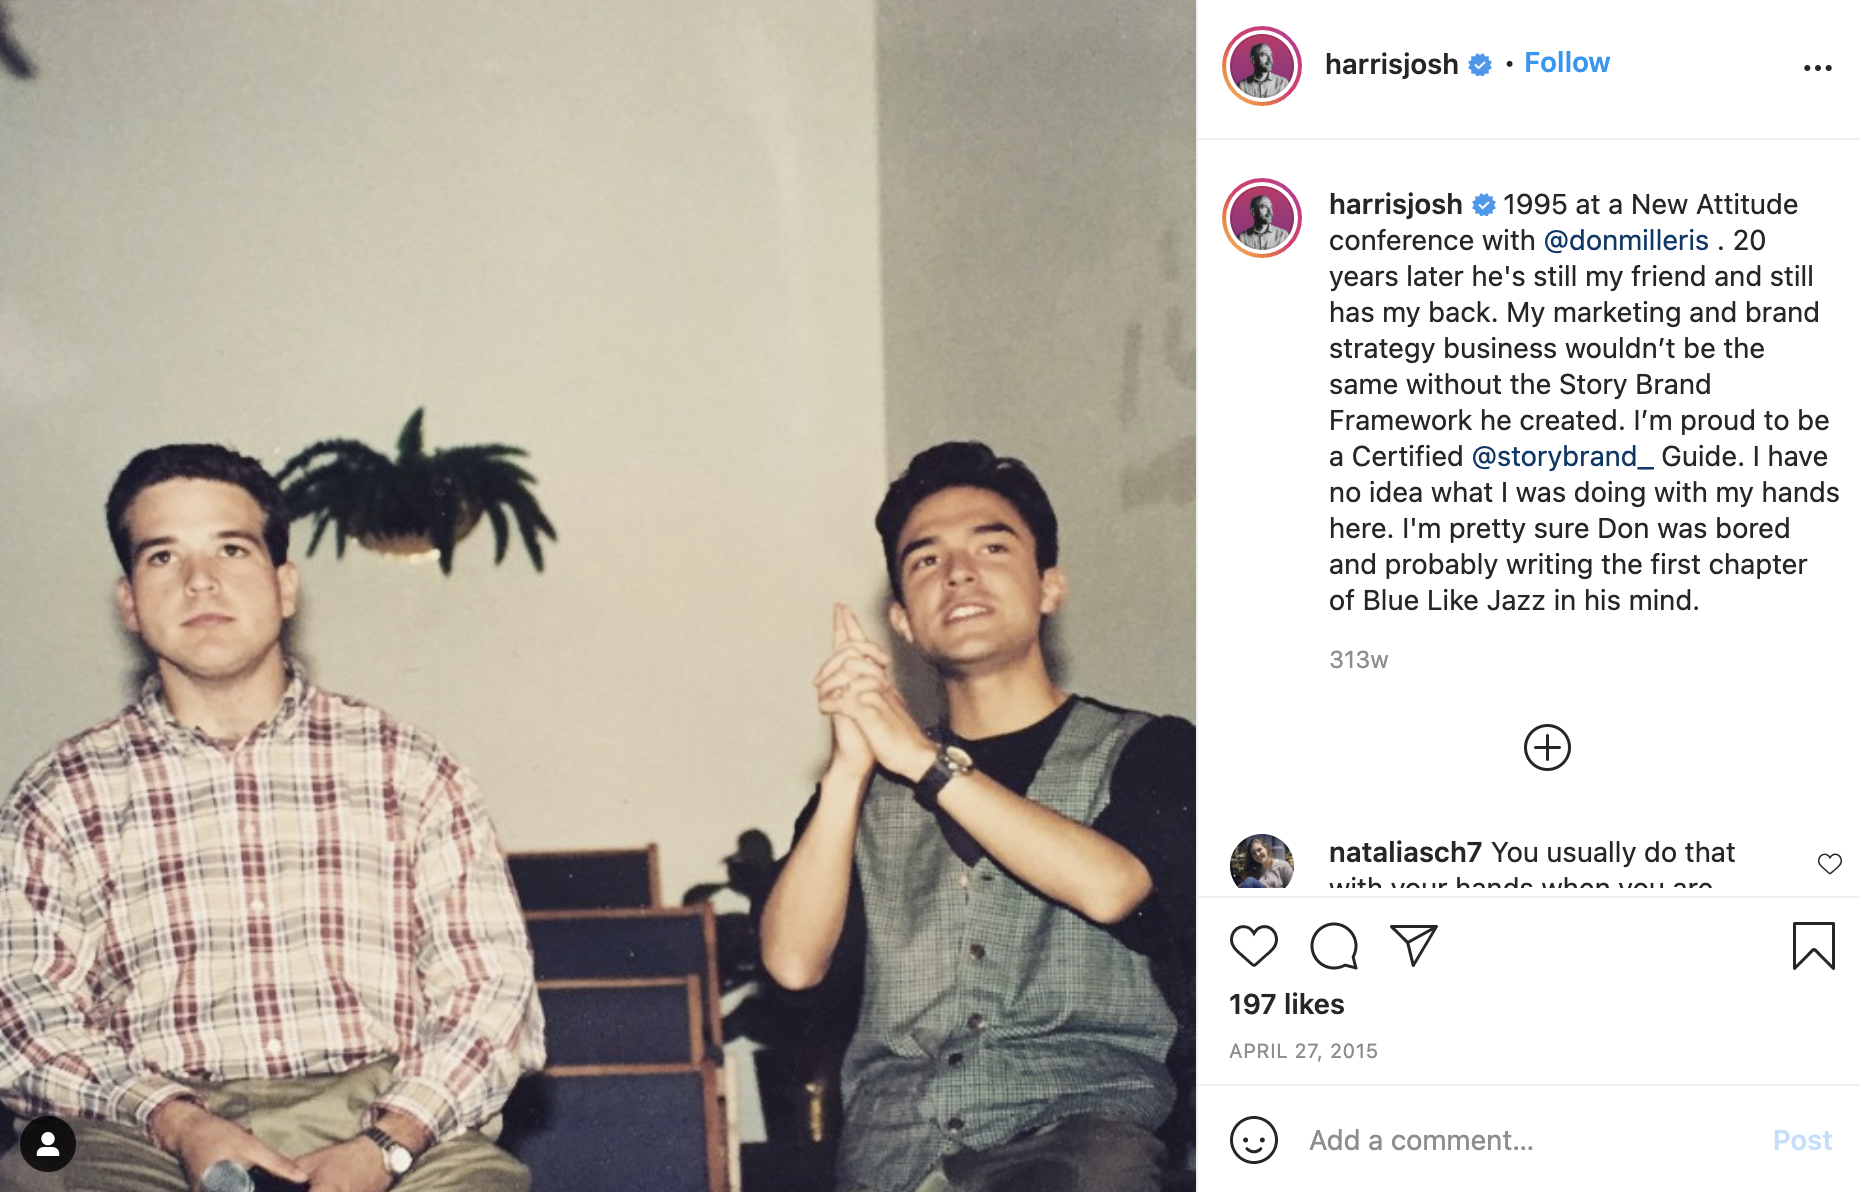 Instagram post featuring a young Donald Miller and Joshua Harris in 1995